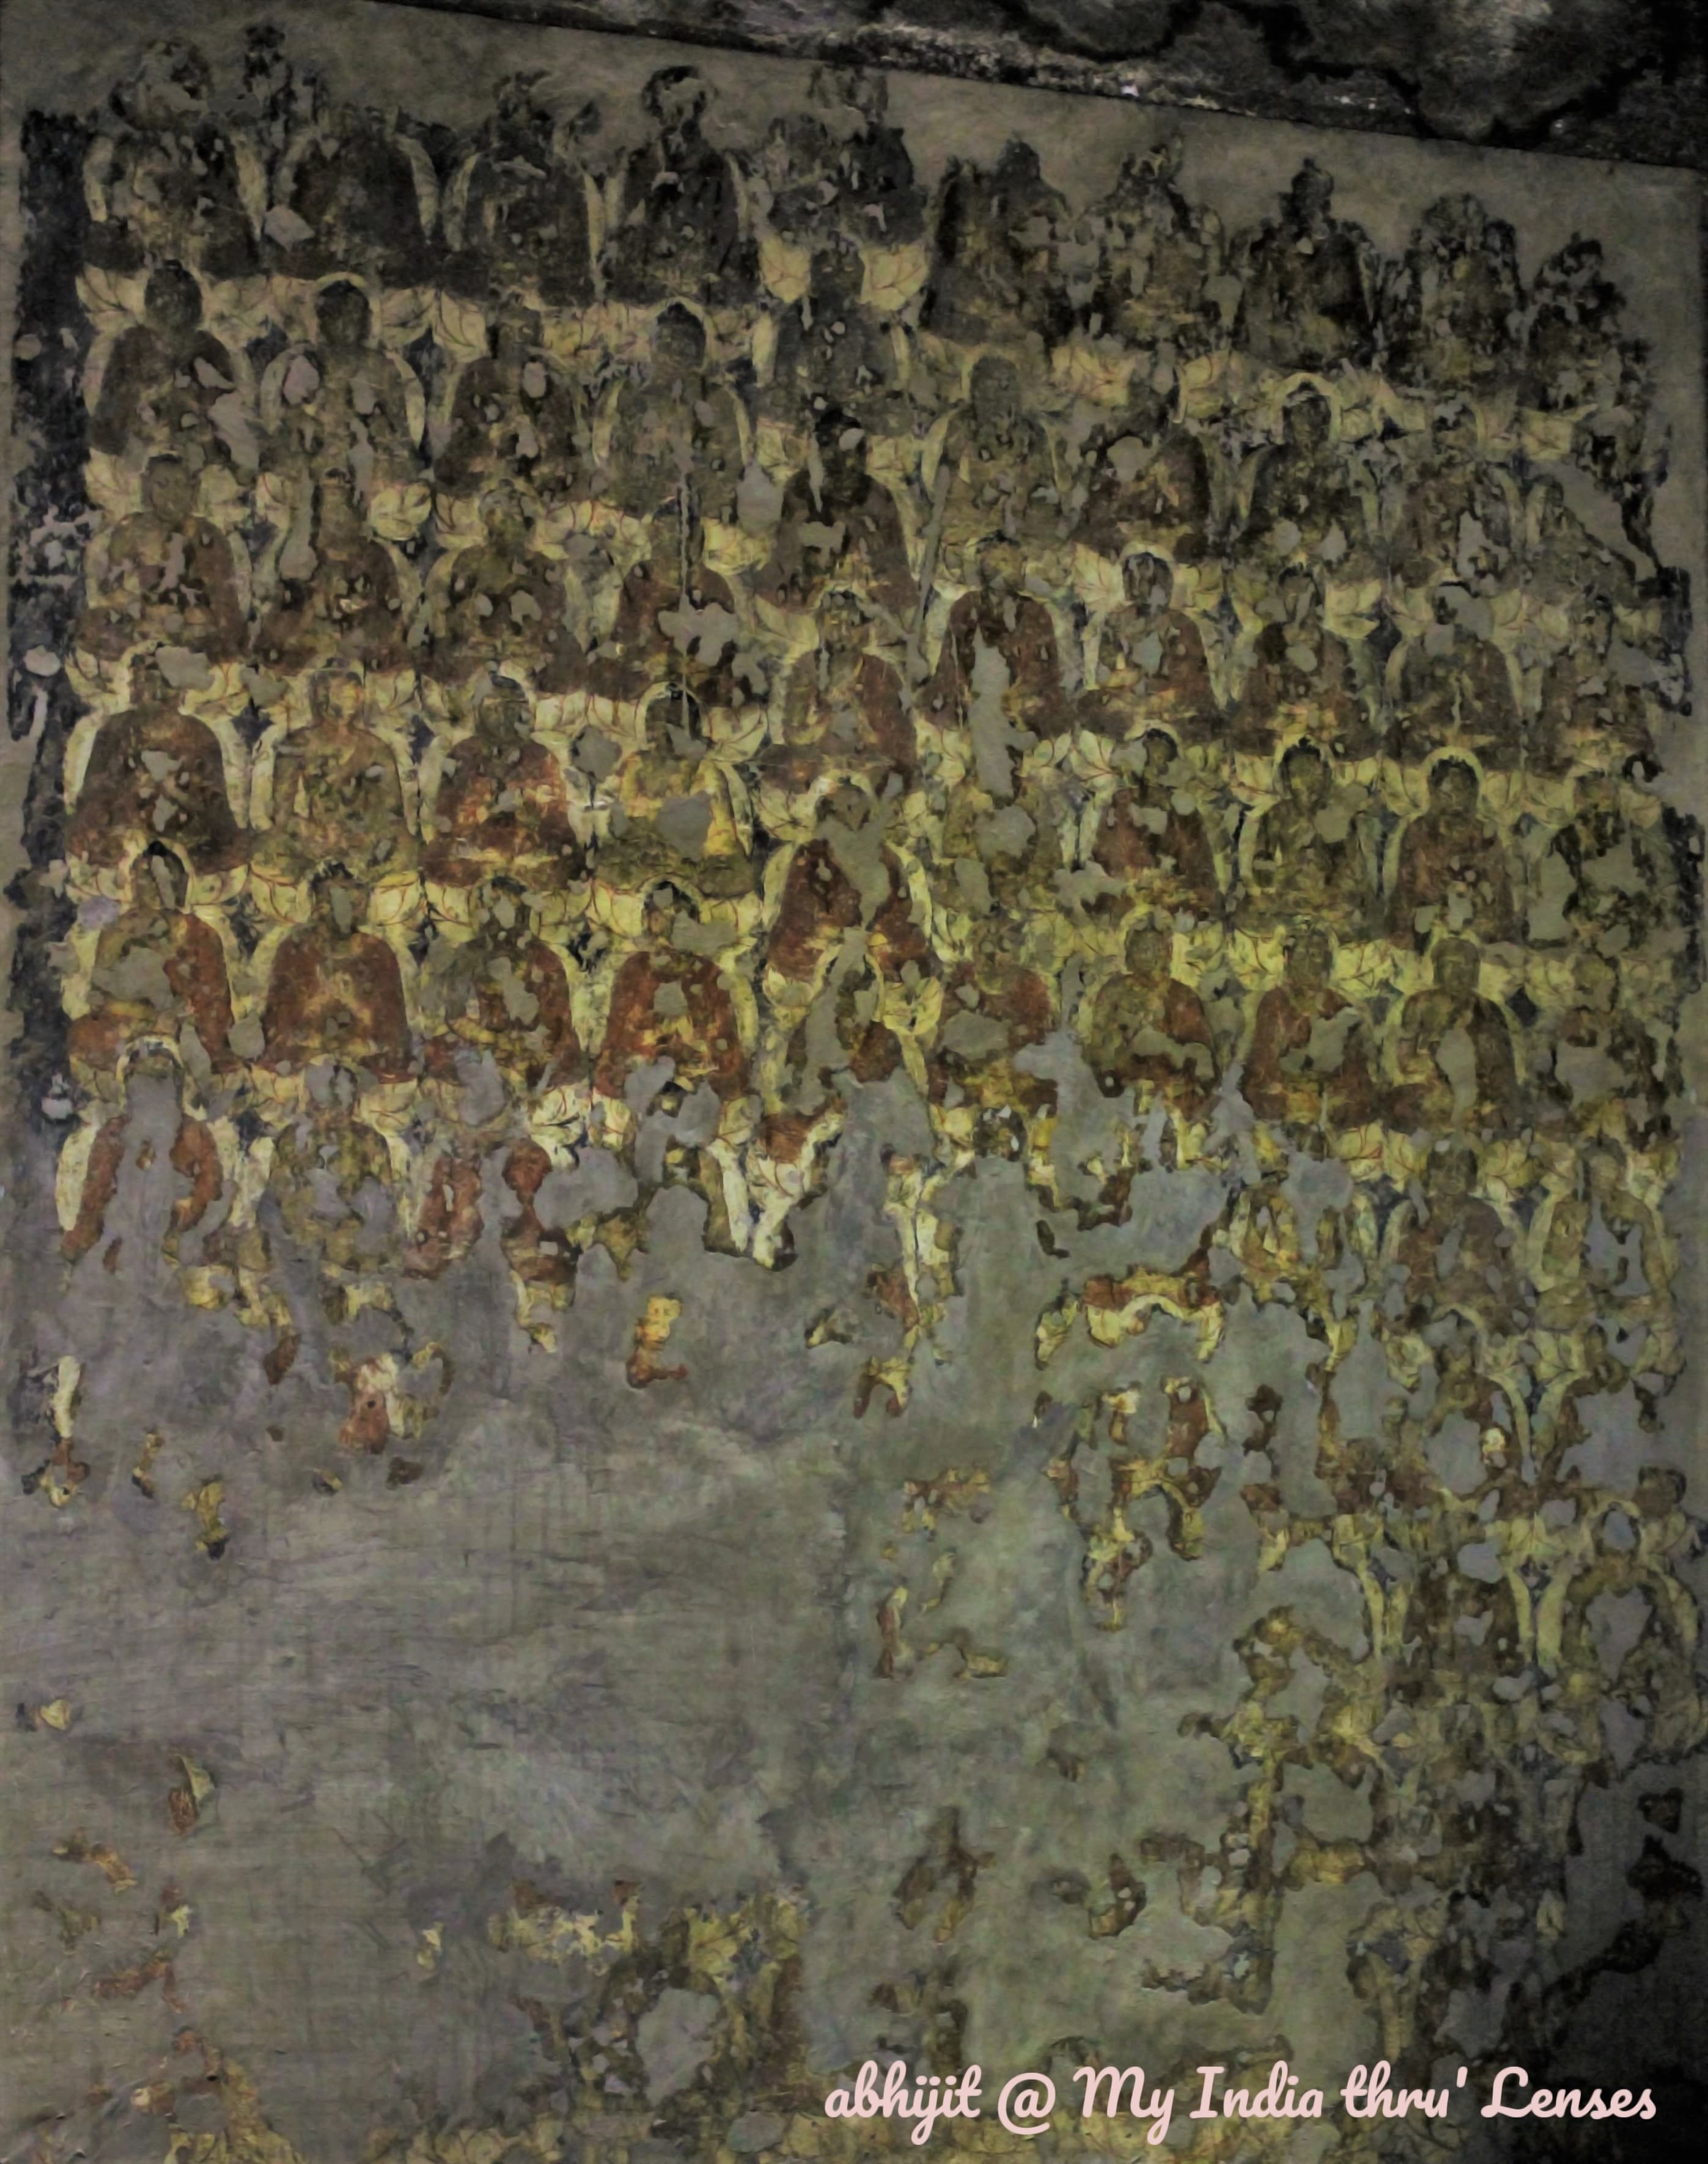 Part of the painting of ‘Thousand Buddhas’ on one of the walls of Cave 2